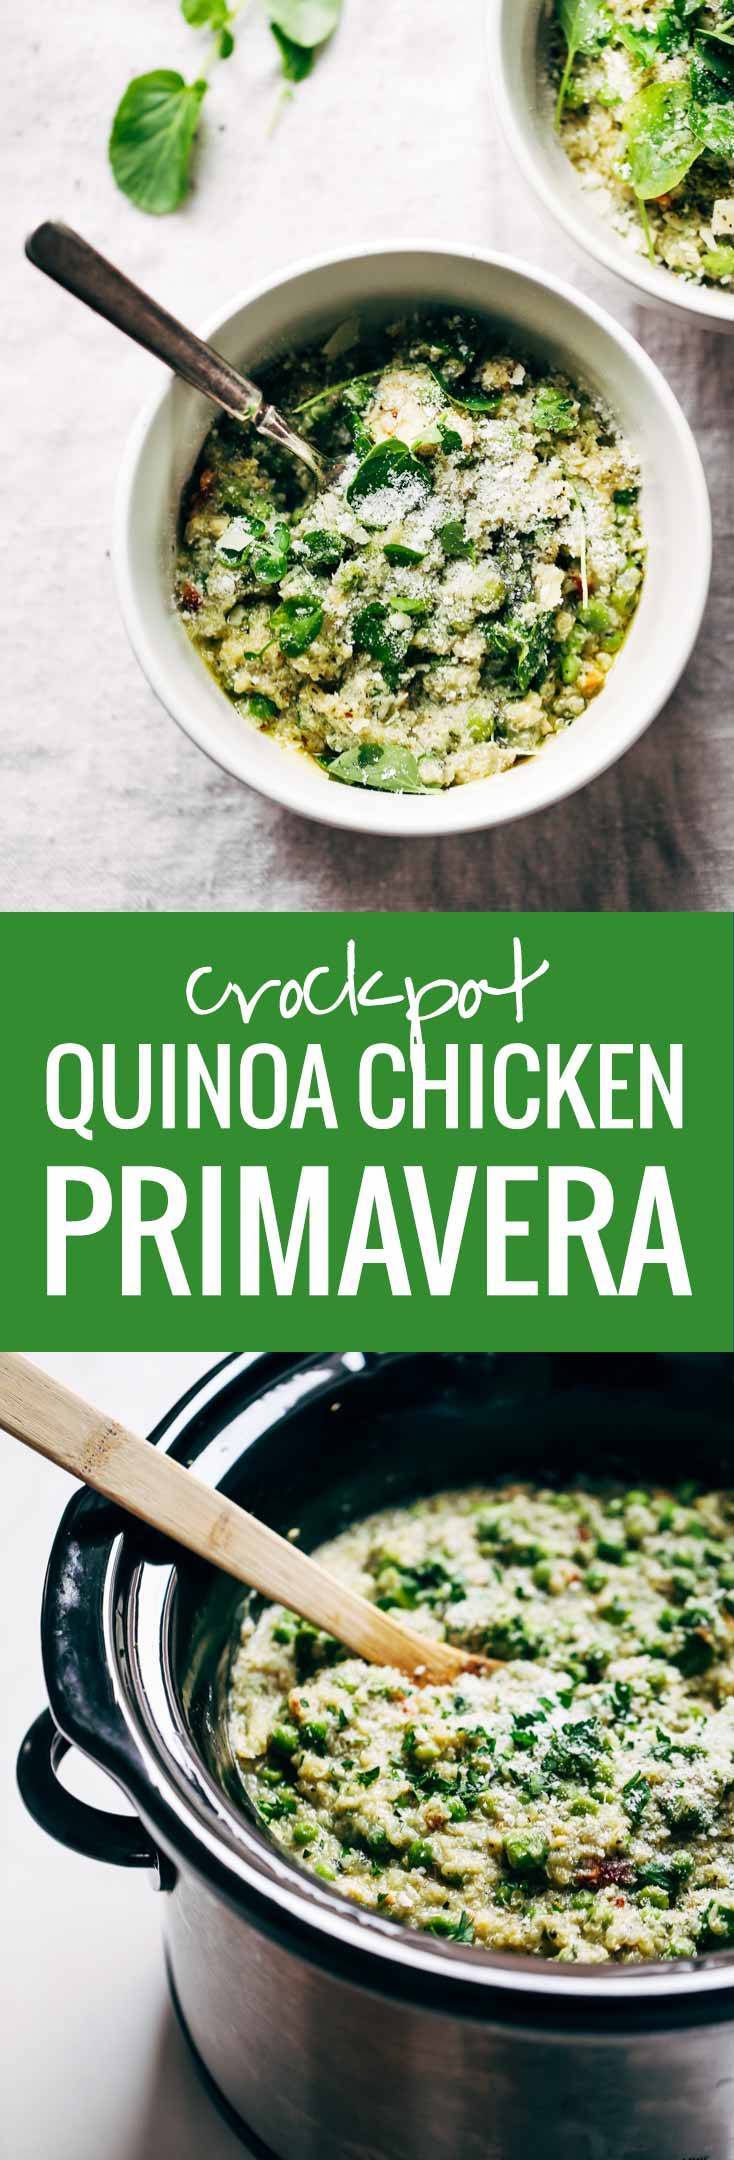 This Crockpot Quinoa Chicken Primavera is both healthy and comforting, plus it makes for a super easy dinner! Loaded with peas, asparagus, quinoa, garlic, parmesan, and chicken. YUM!